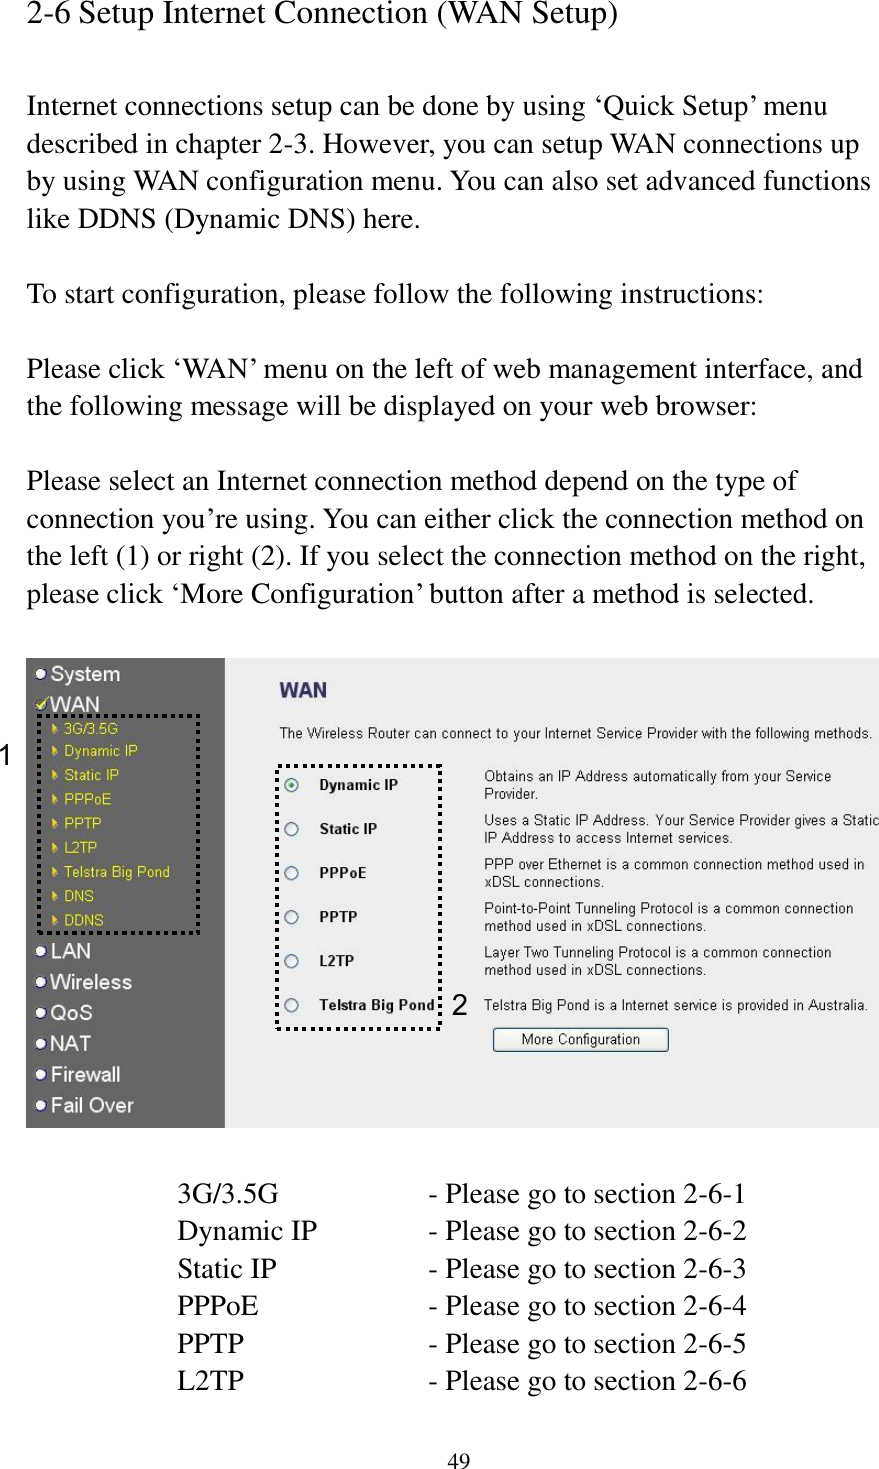 49 2-6 Setup Internet Connection (WAN Setup)  Internet connections setup can be done by using „Quick Setup‟ menu described in chapter 2-3. However, you can setup WAN connections up by using WAN configuration menu. You can also set advanced functions like DDNS (Dynamic DNS) here.  To start configuration, please follow the following instructions:  Please click „WAN‟ menu on the left of web management interface, and the following message will be displayed on your web browser:  Please select an Internet connection method depend on the type of connection you‟re using. You can either click the connection method on the left (1) or right (2). If you select the connection method on the right, please click „More Configuration‟ button after a method is selected.    3G/3.5G      - Please go to section 2-6-1 Dynamic IP     - Please go to section 2-6-2 Static IP       - Please go to section 2-6-3 PPPoE        - Please go to section 2-6-4 PPTP        - Please go to section 2-6-5 L2TP        - Please go to section 2-6-6 1 2 